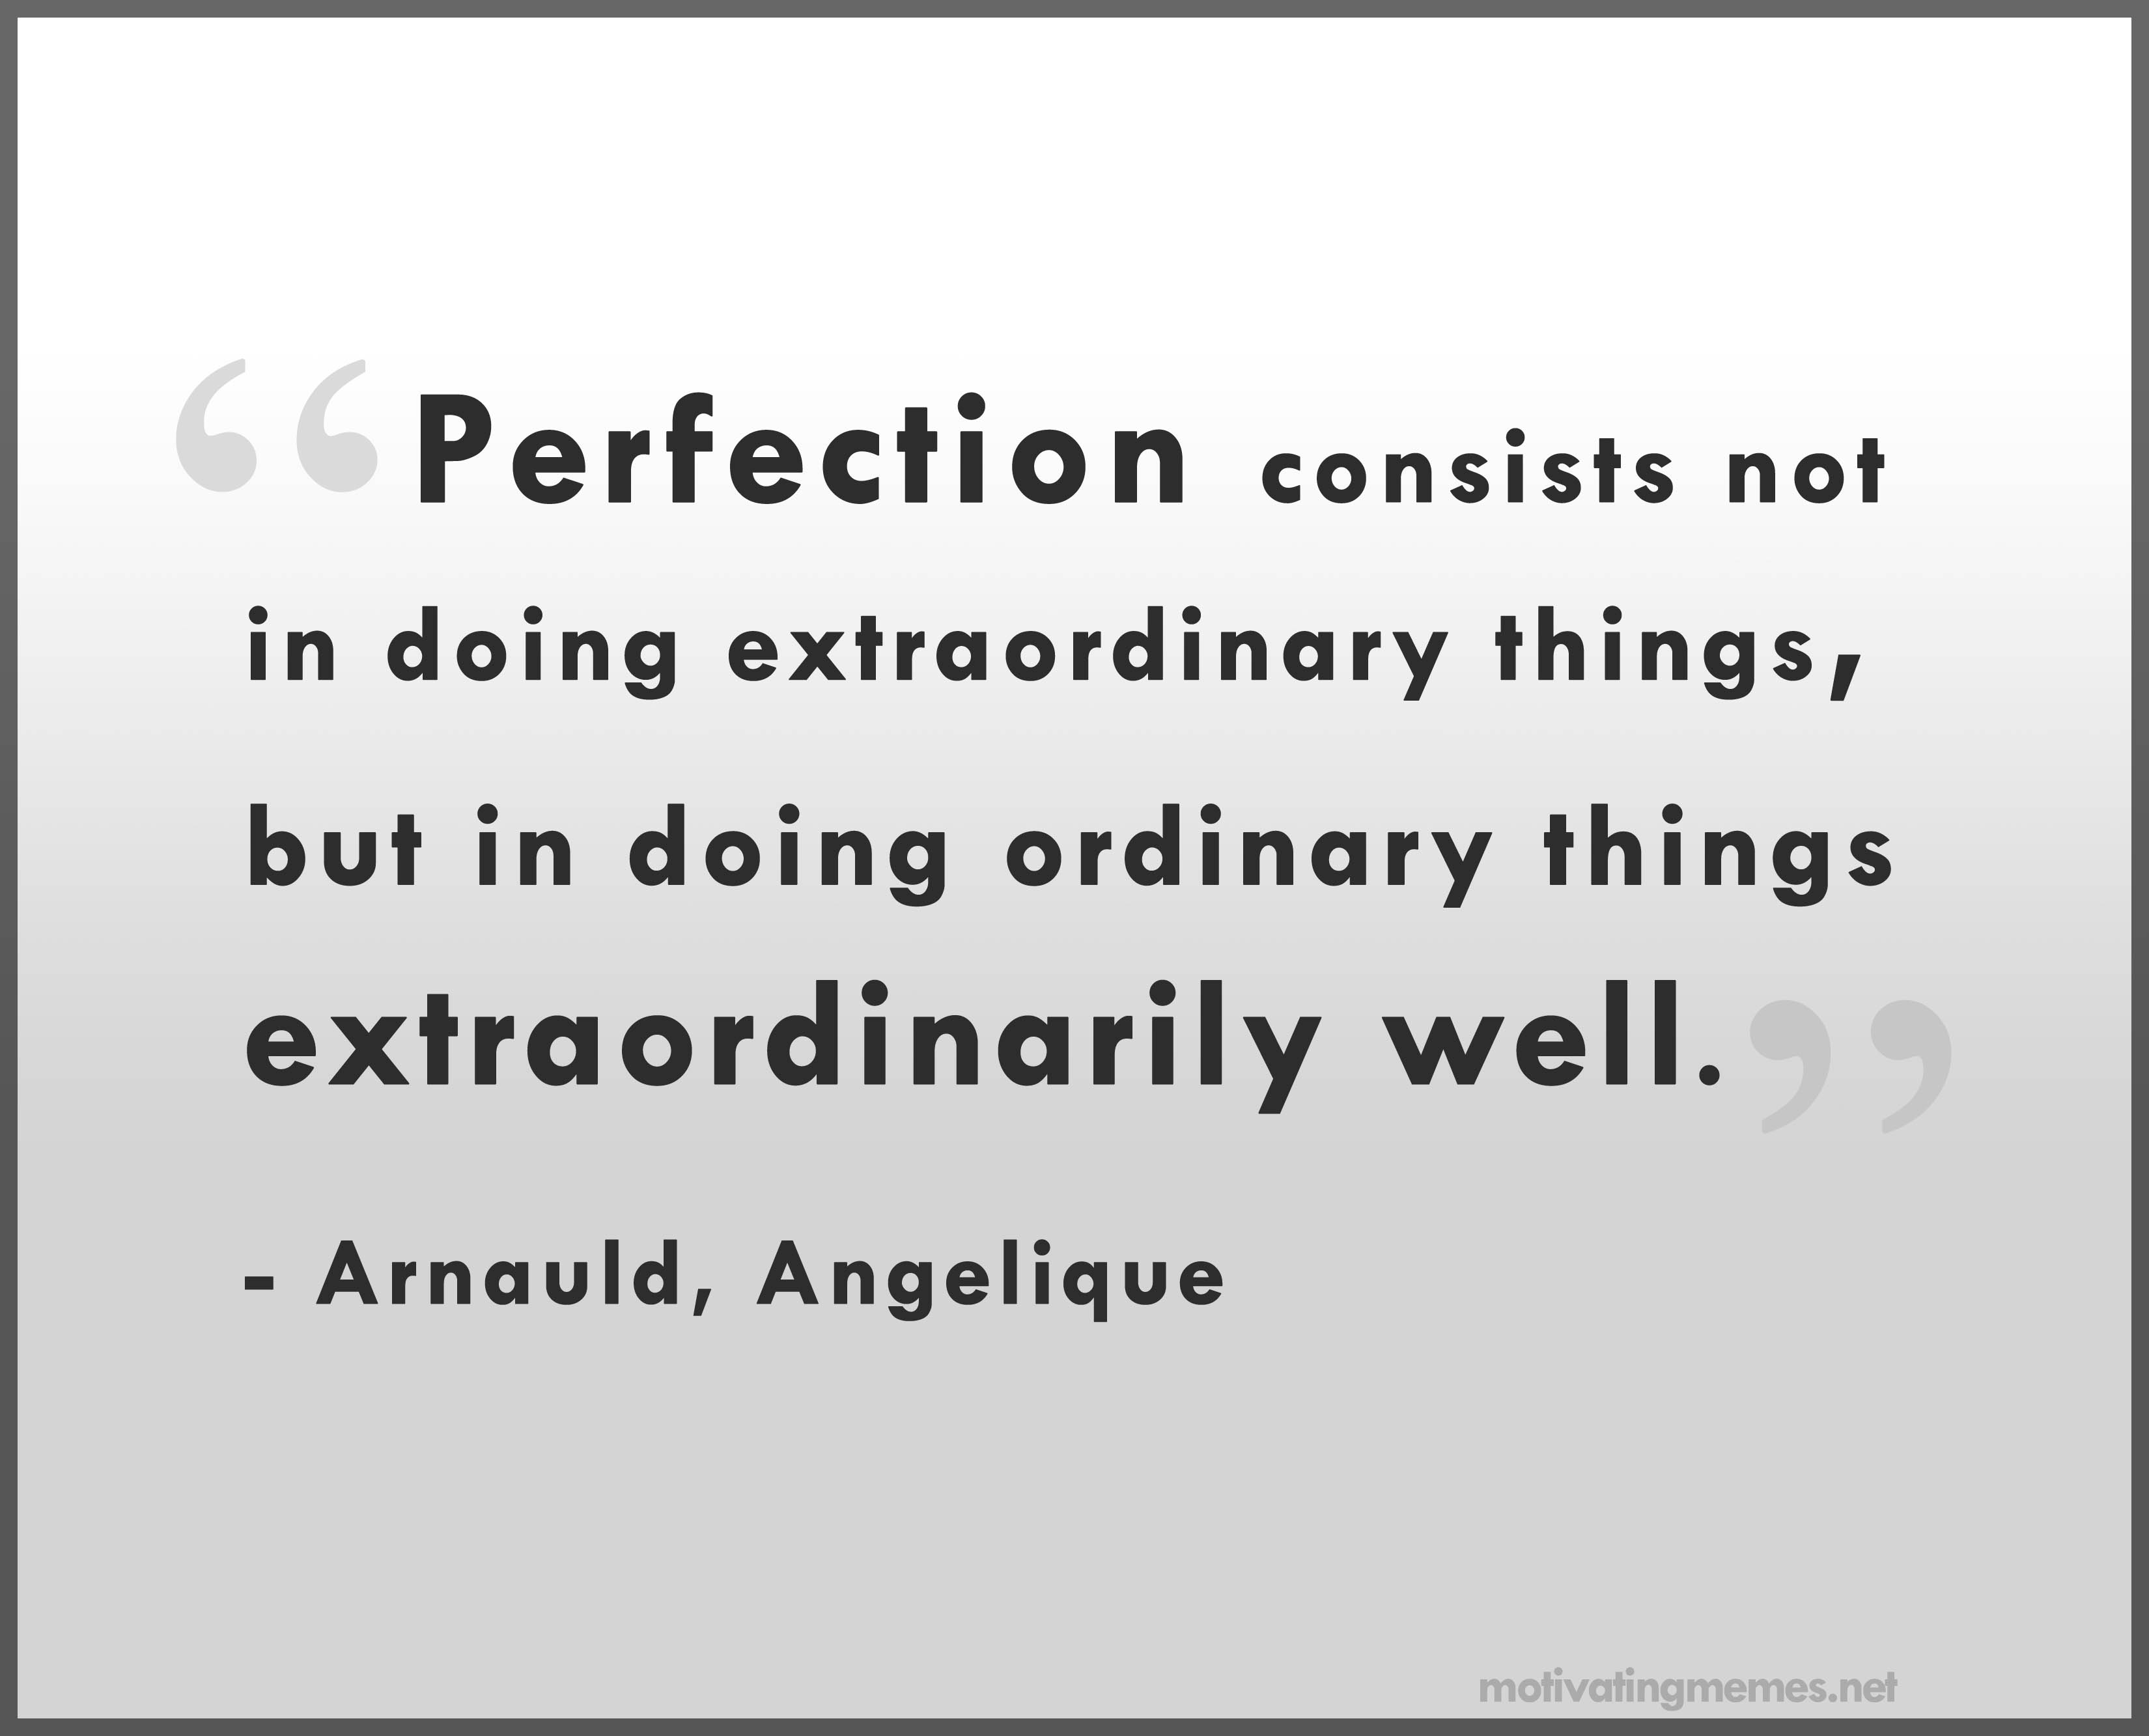 Perfection consists not in doing extraordinary things, but in doing ordinary things extraordinarily well. Angelique Arnauld